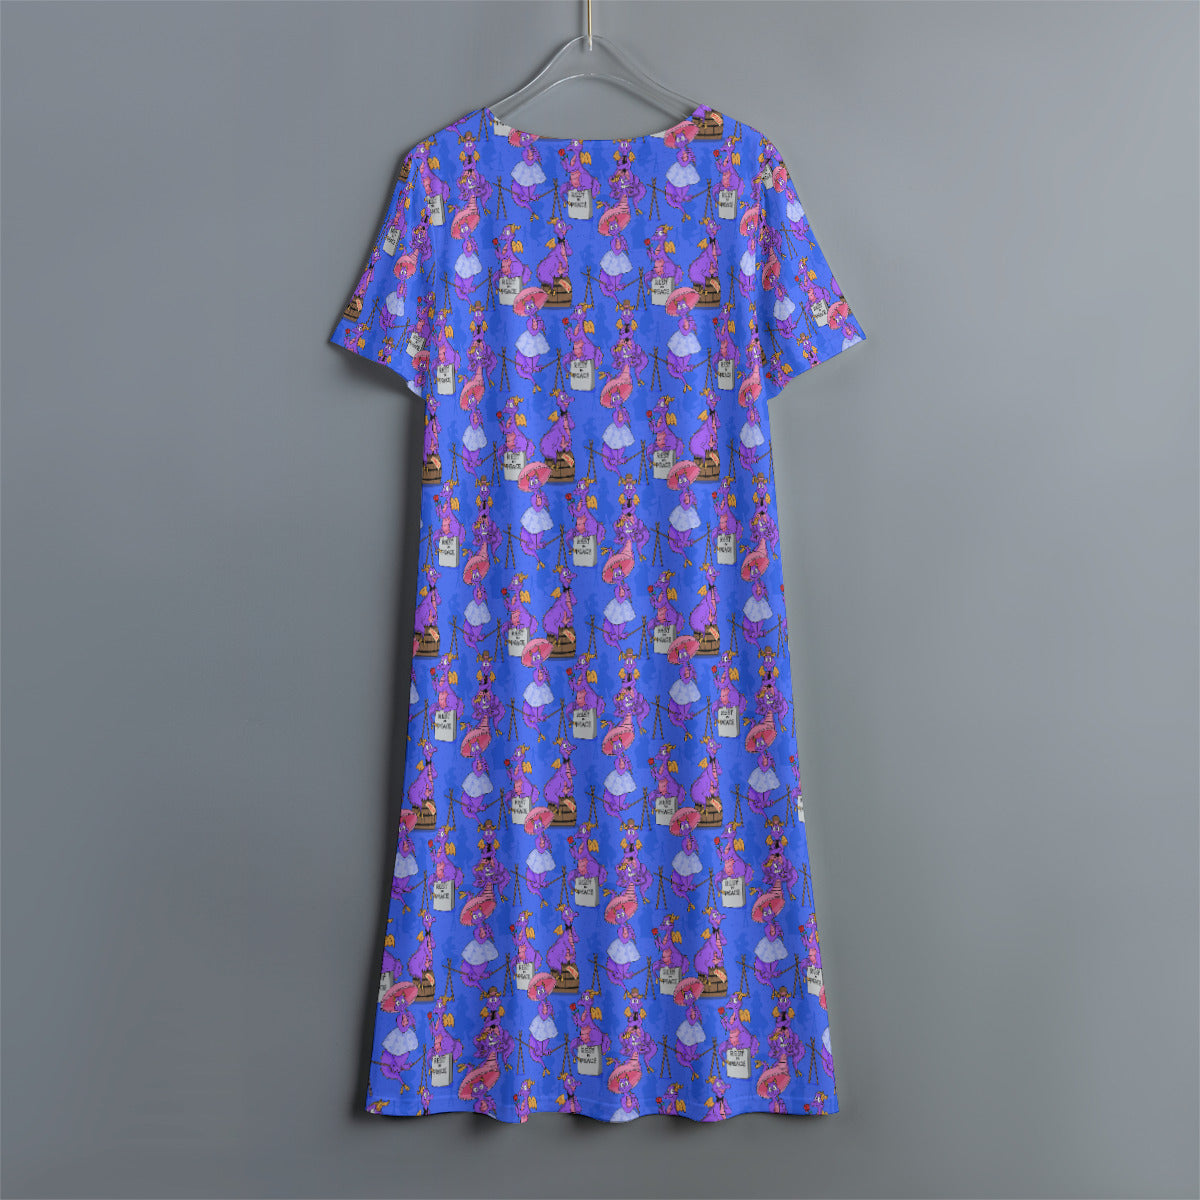 Haunted Mansion Figment Women's Swing Dress With Short Sleeve